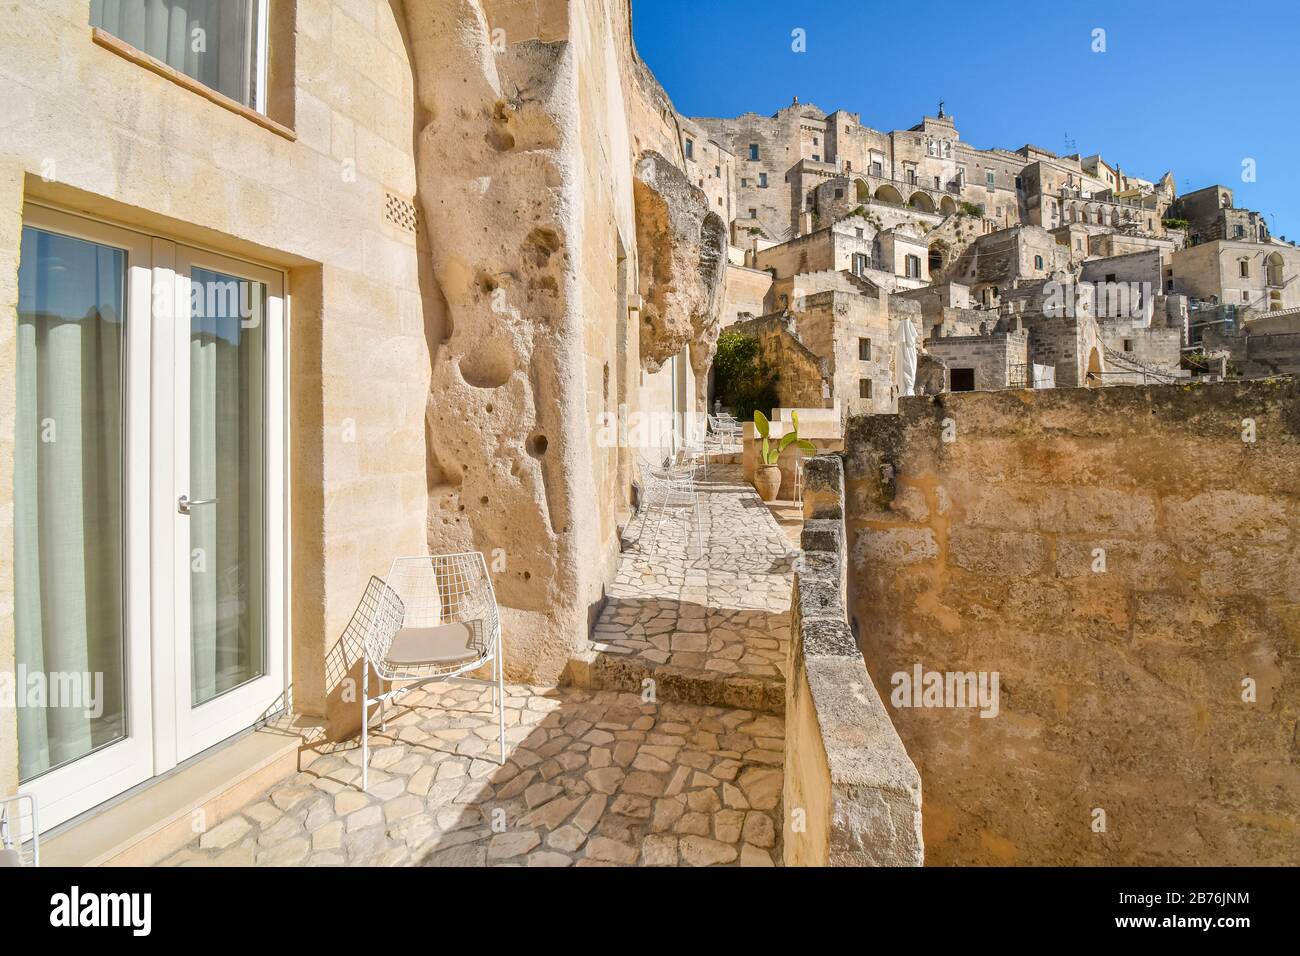 A modern sliding glass door and metal chair sit outside a patio in the ancient cave hillside city of Matera, Italy. Stock Photo